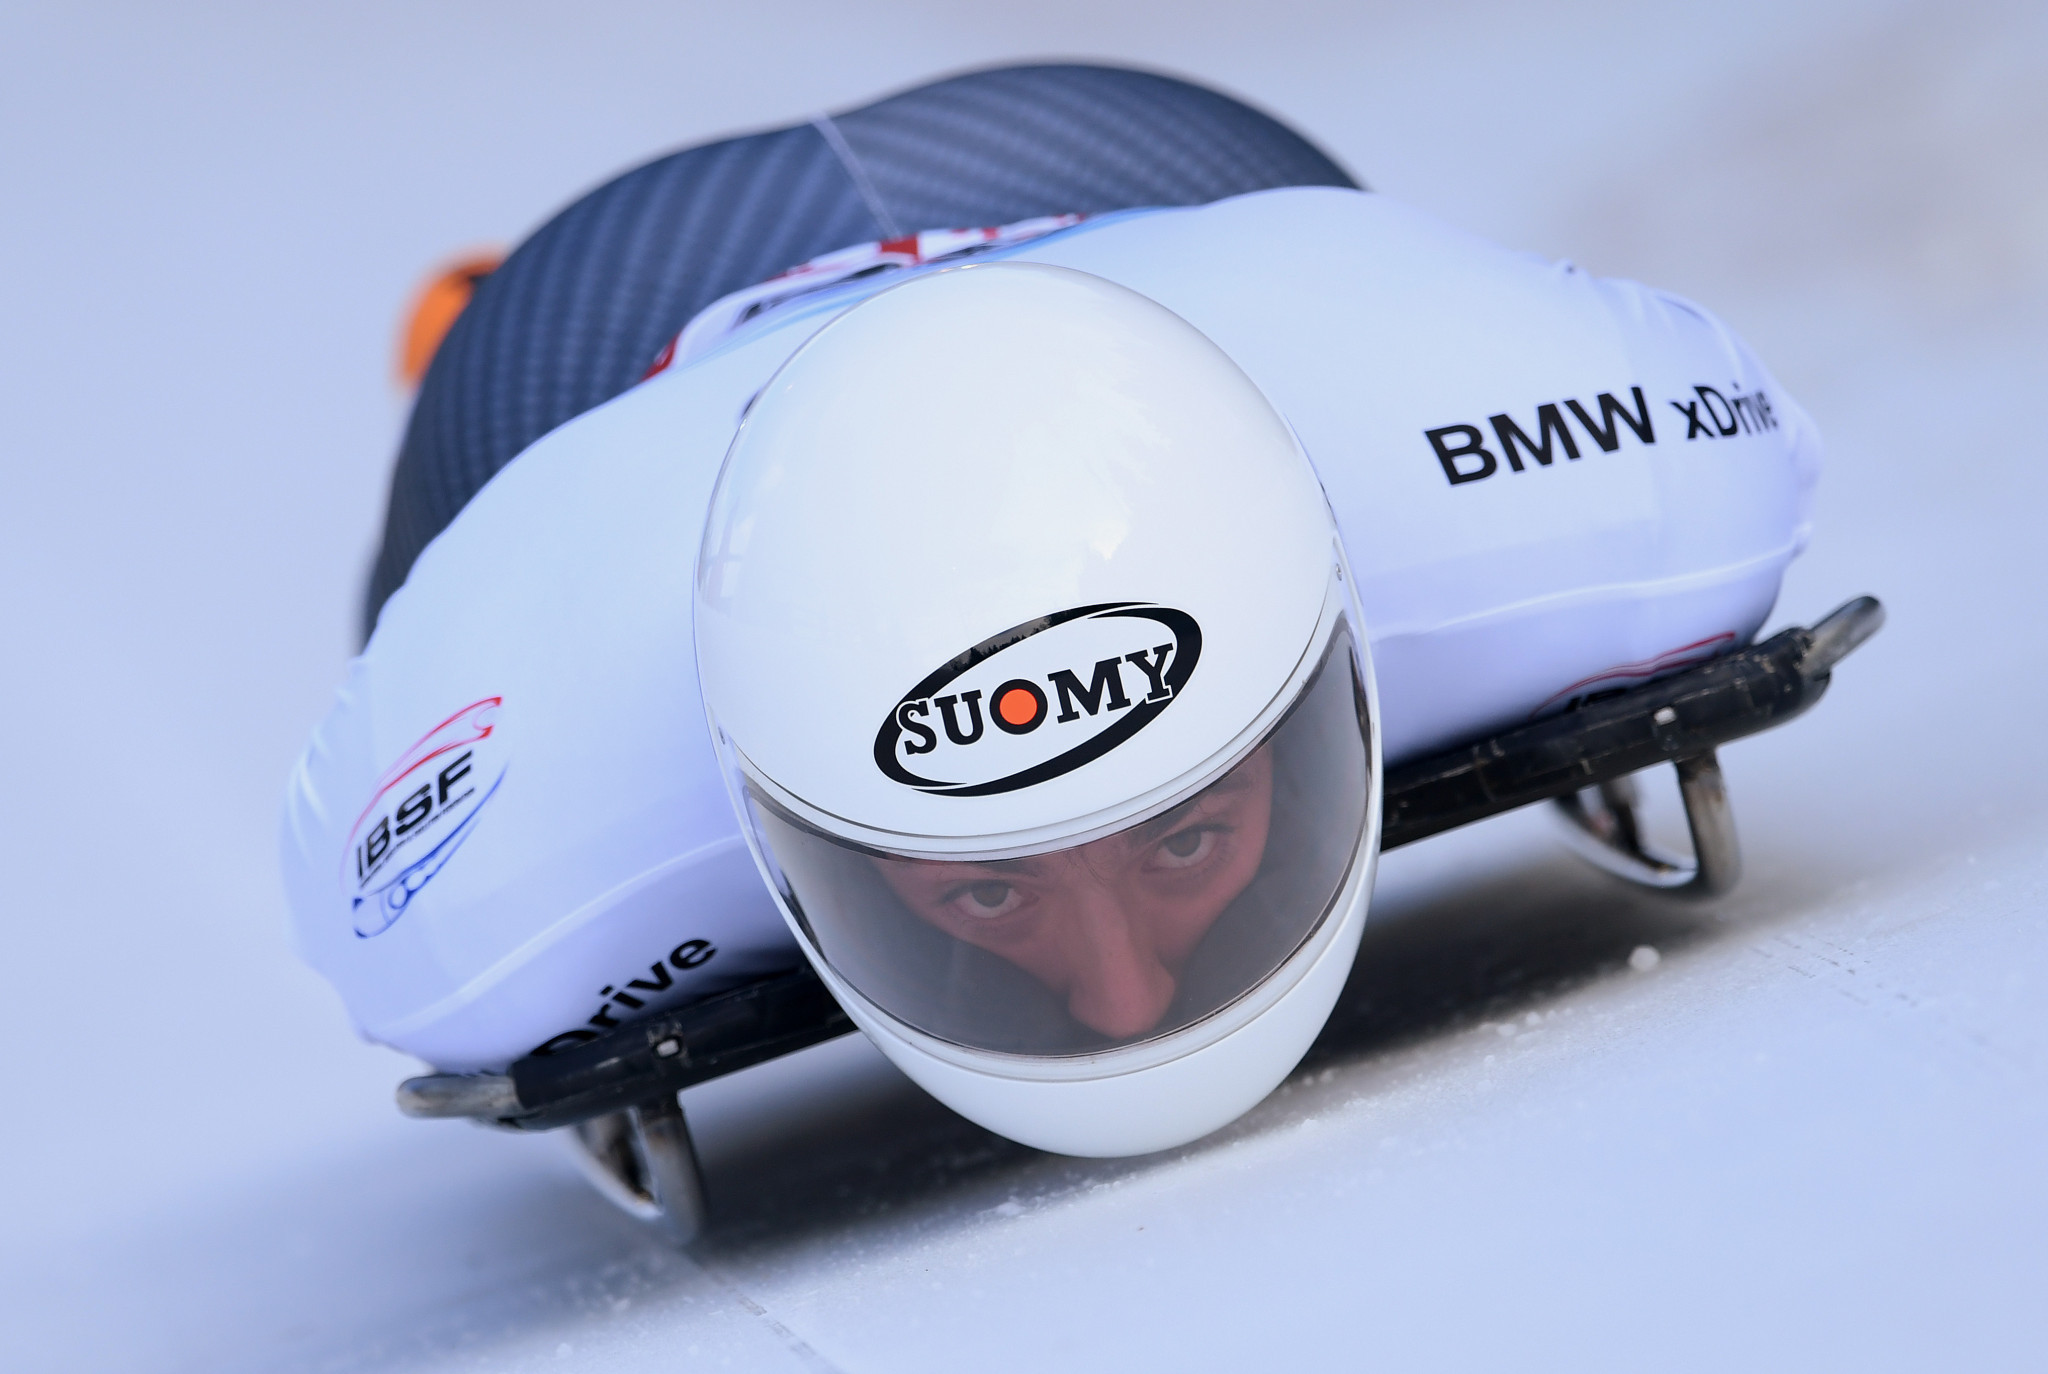 Mattia Gaspari, who won claimed a bronze at this year's International Bobsleigh and Skeleton Federation World Championships, is set to be in the training group ©Getty Images